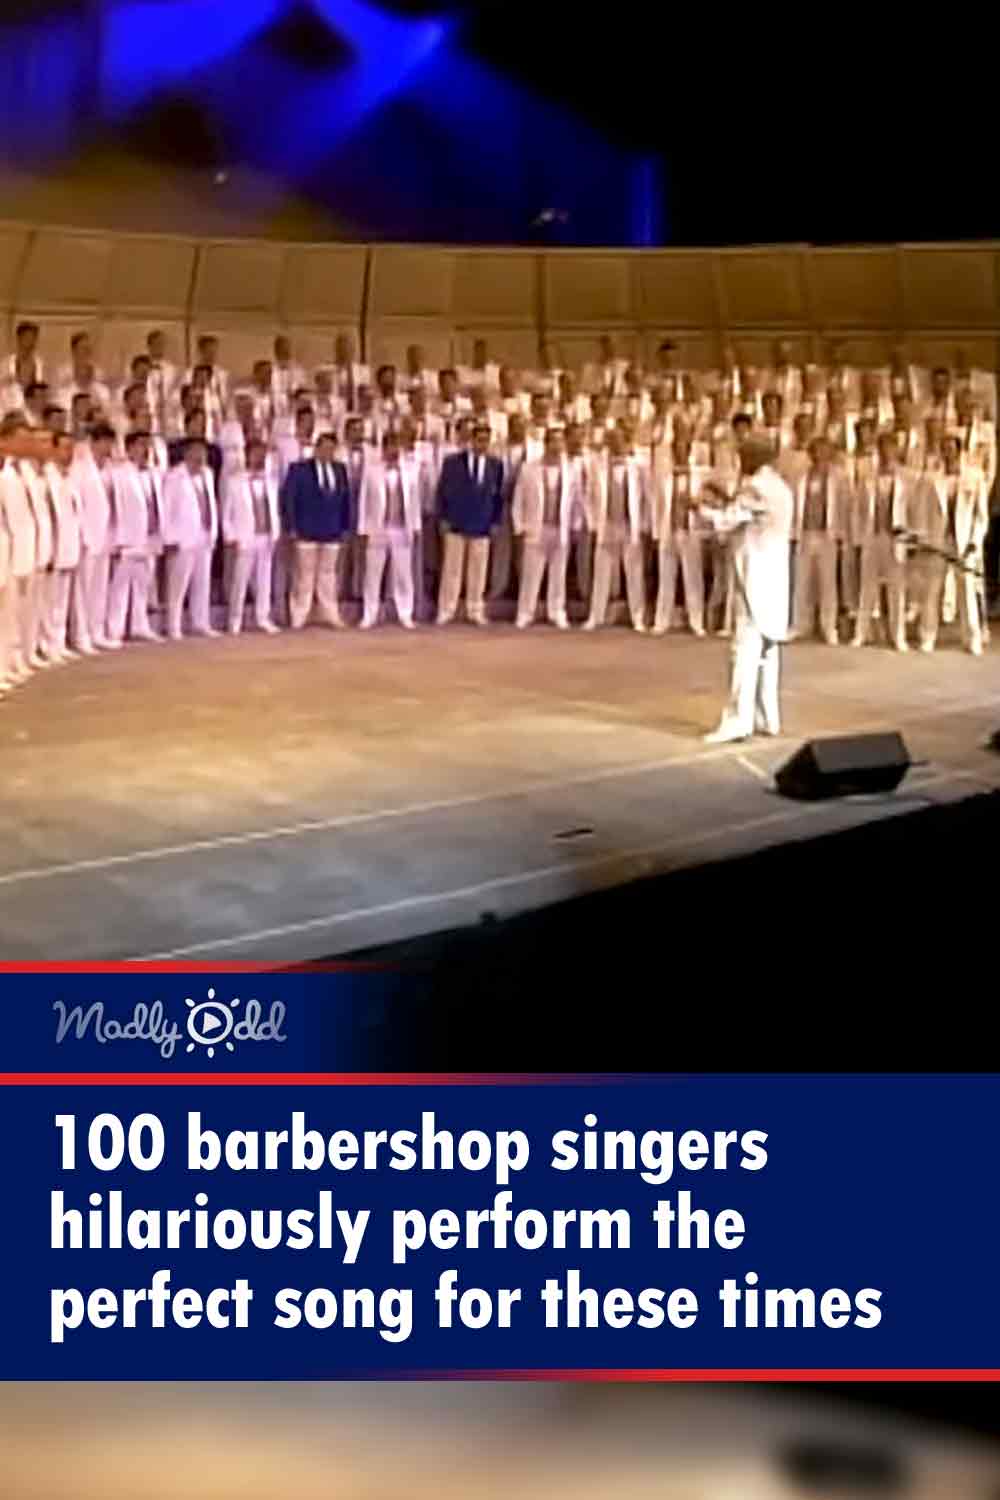 100 barbershop singers hilariously perform the perfect song for these times